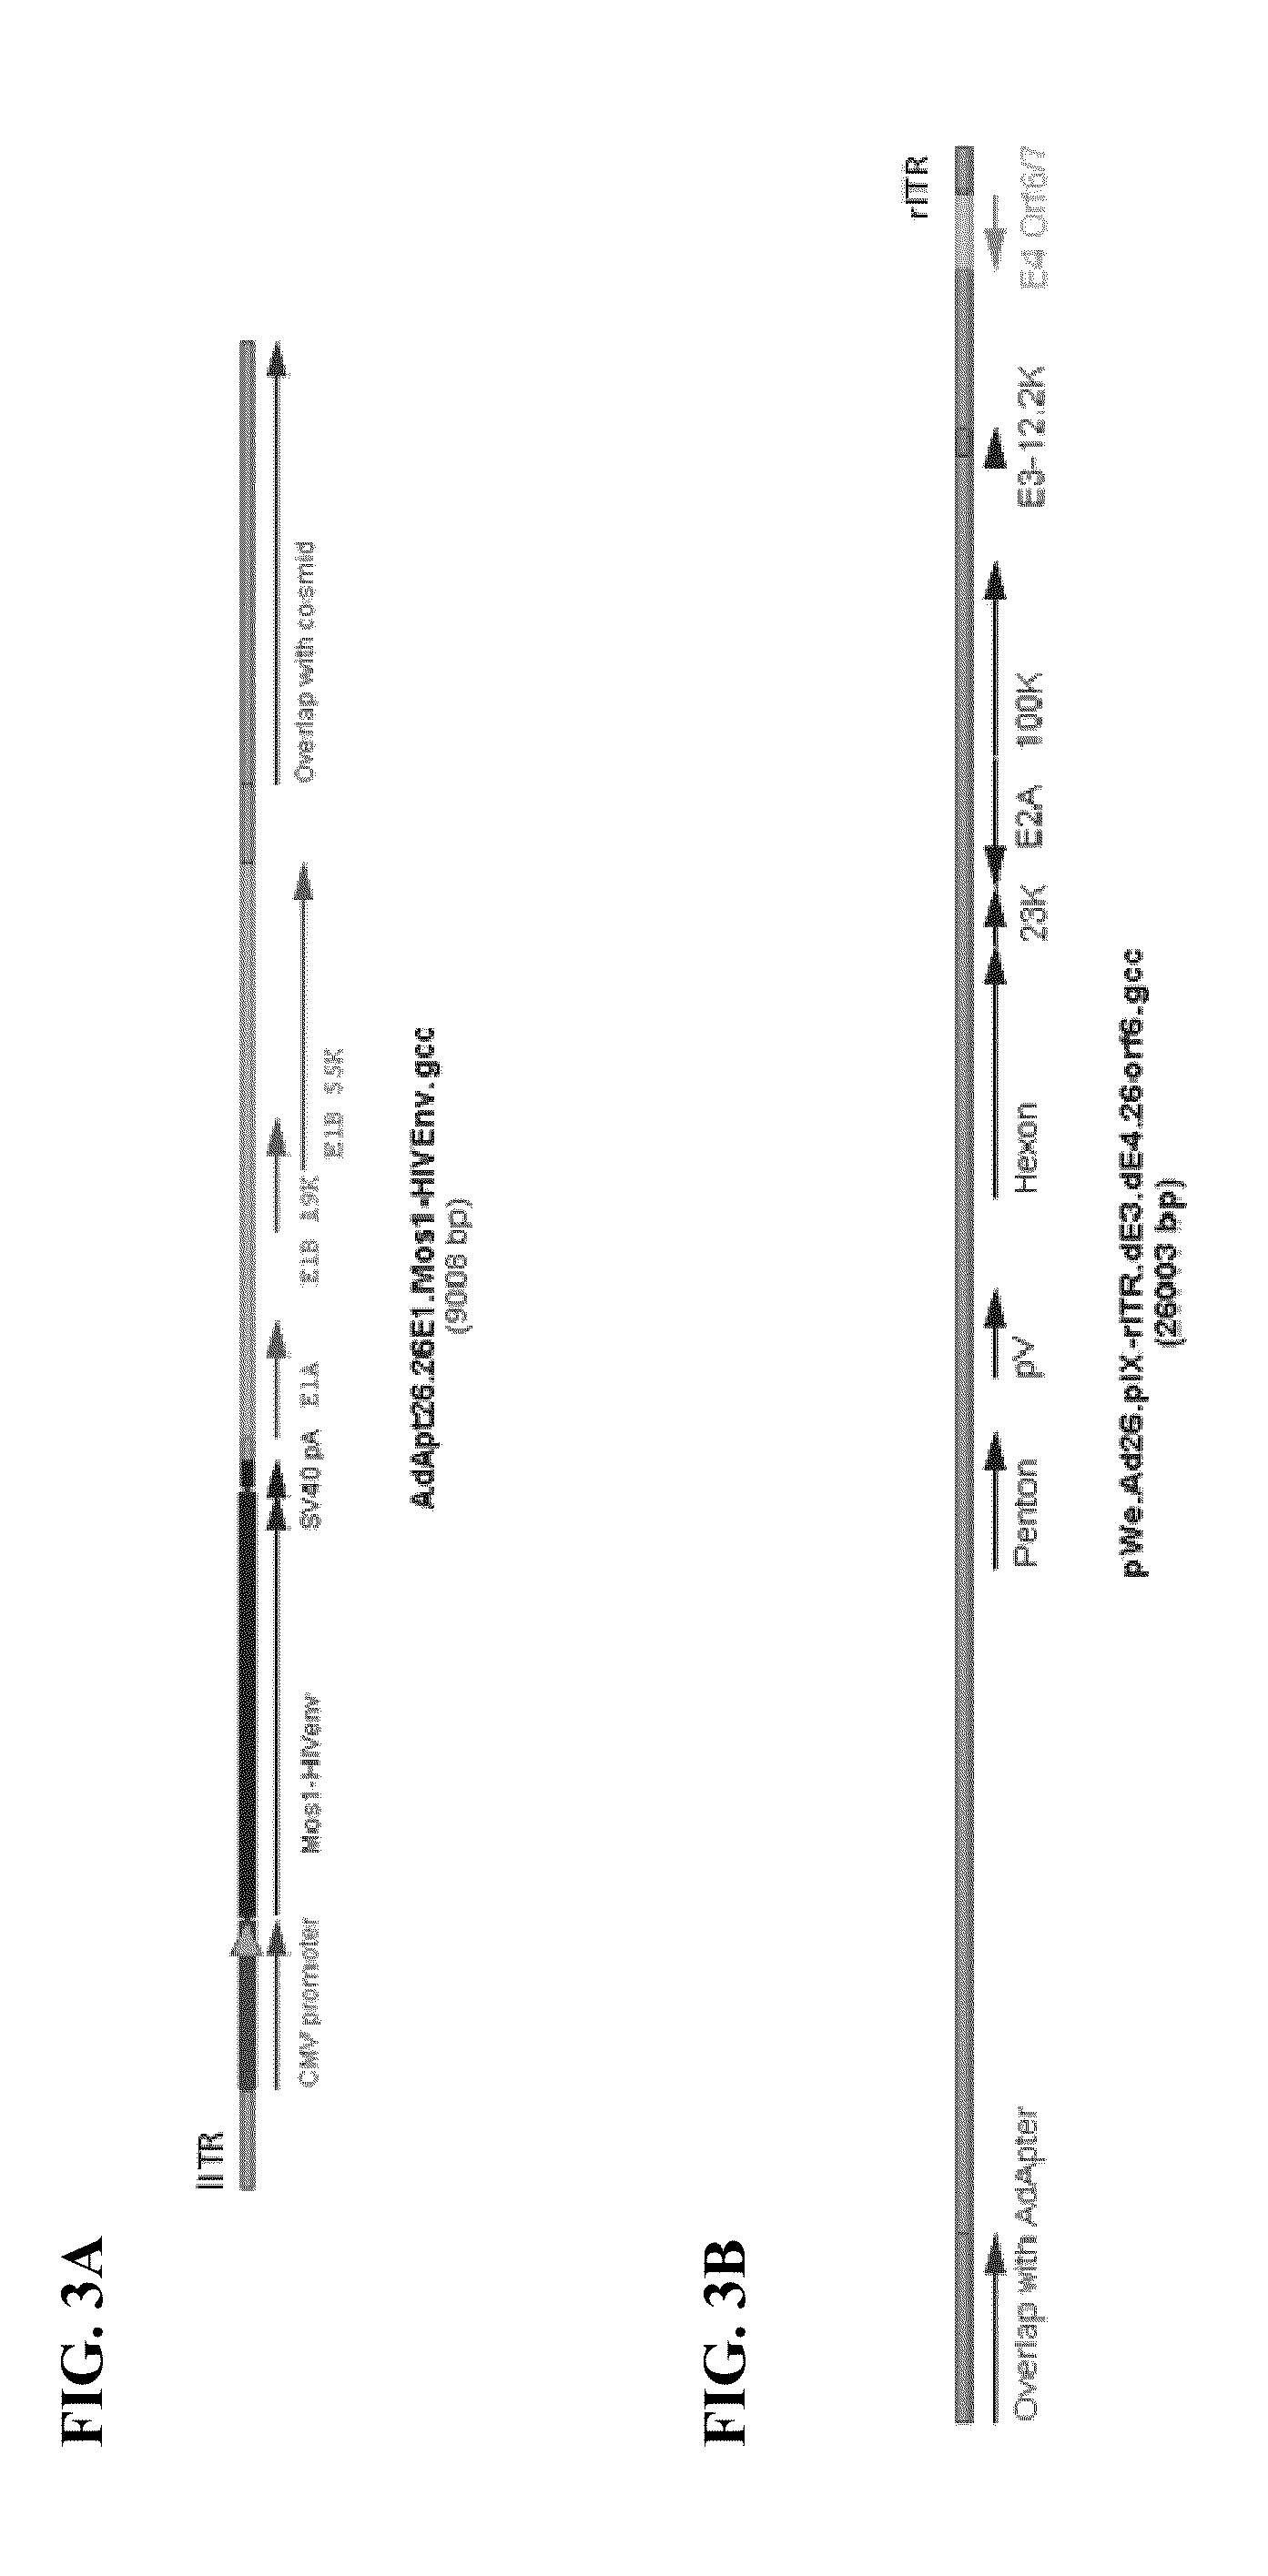 Replicating recombinant adenovirus vectors, compositions, and methods of use thereof